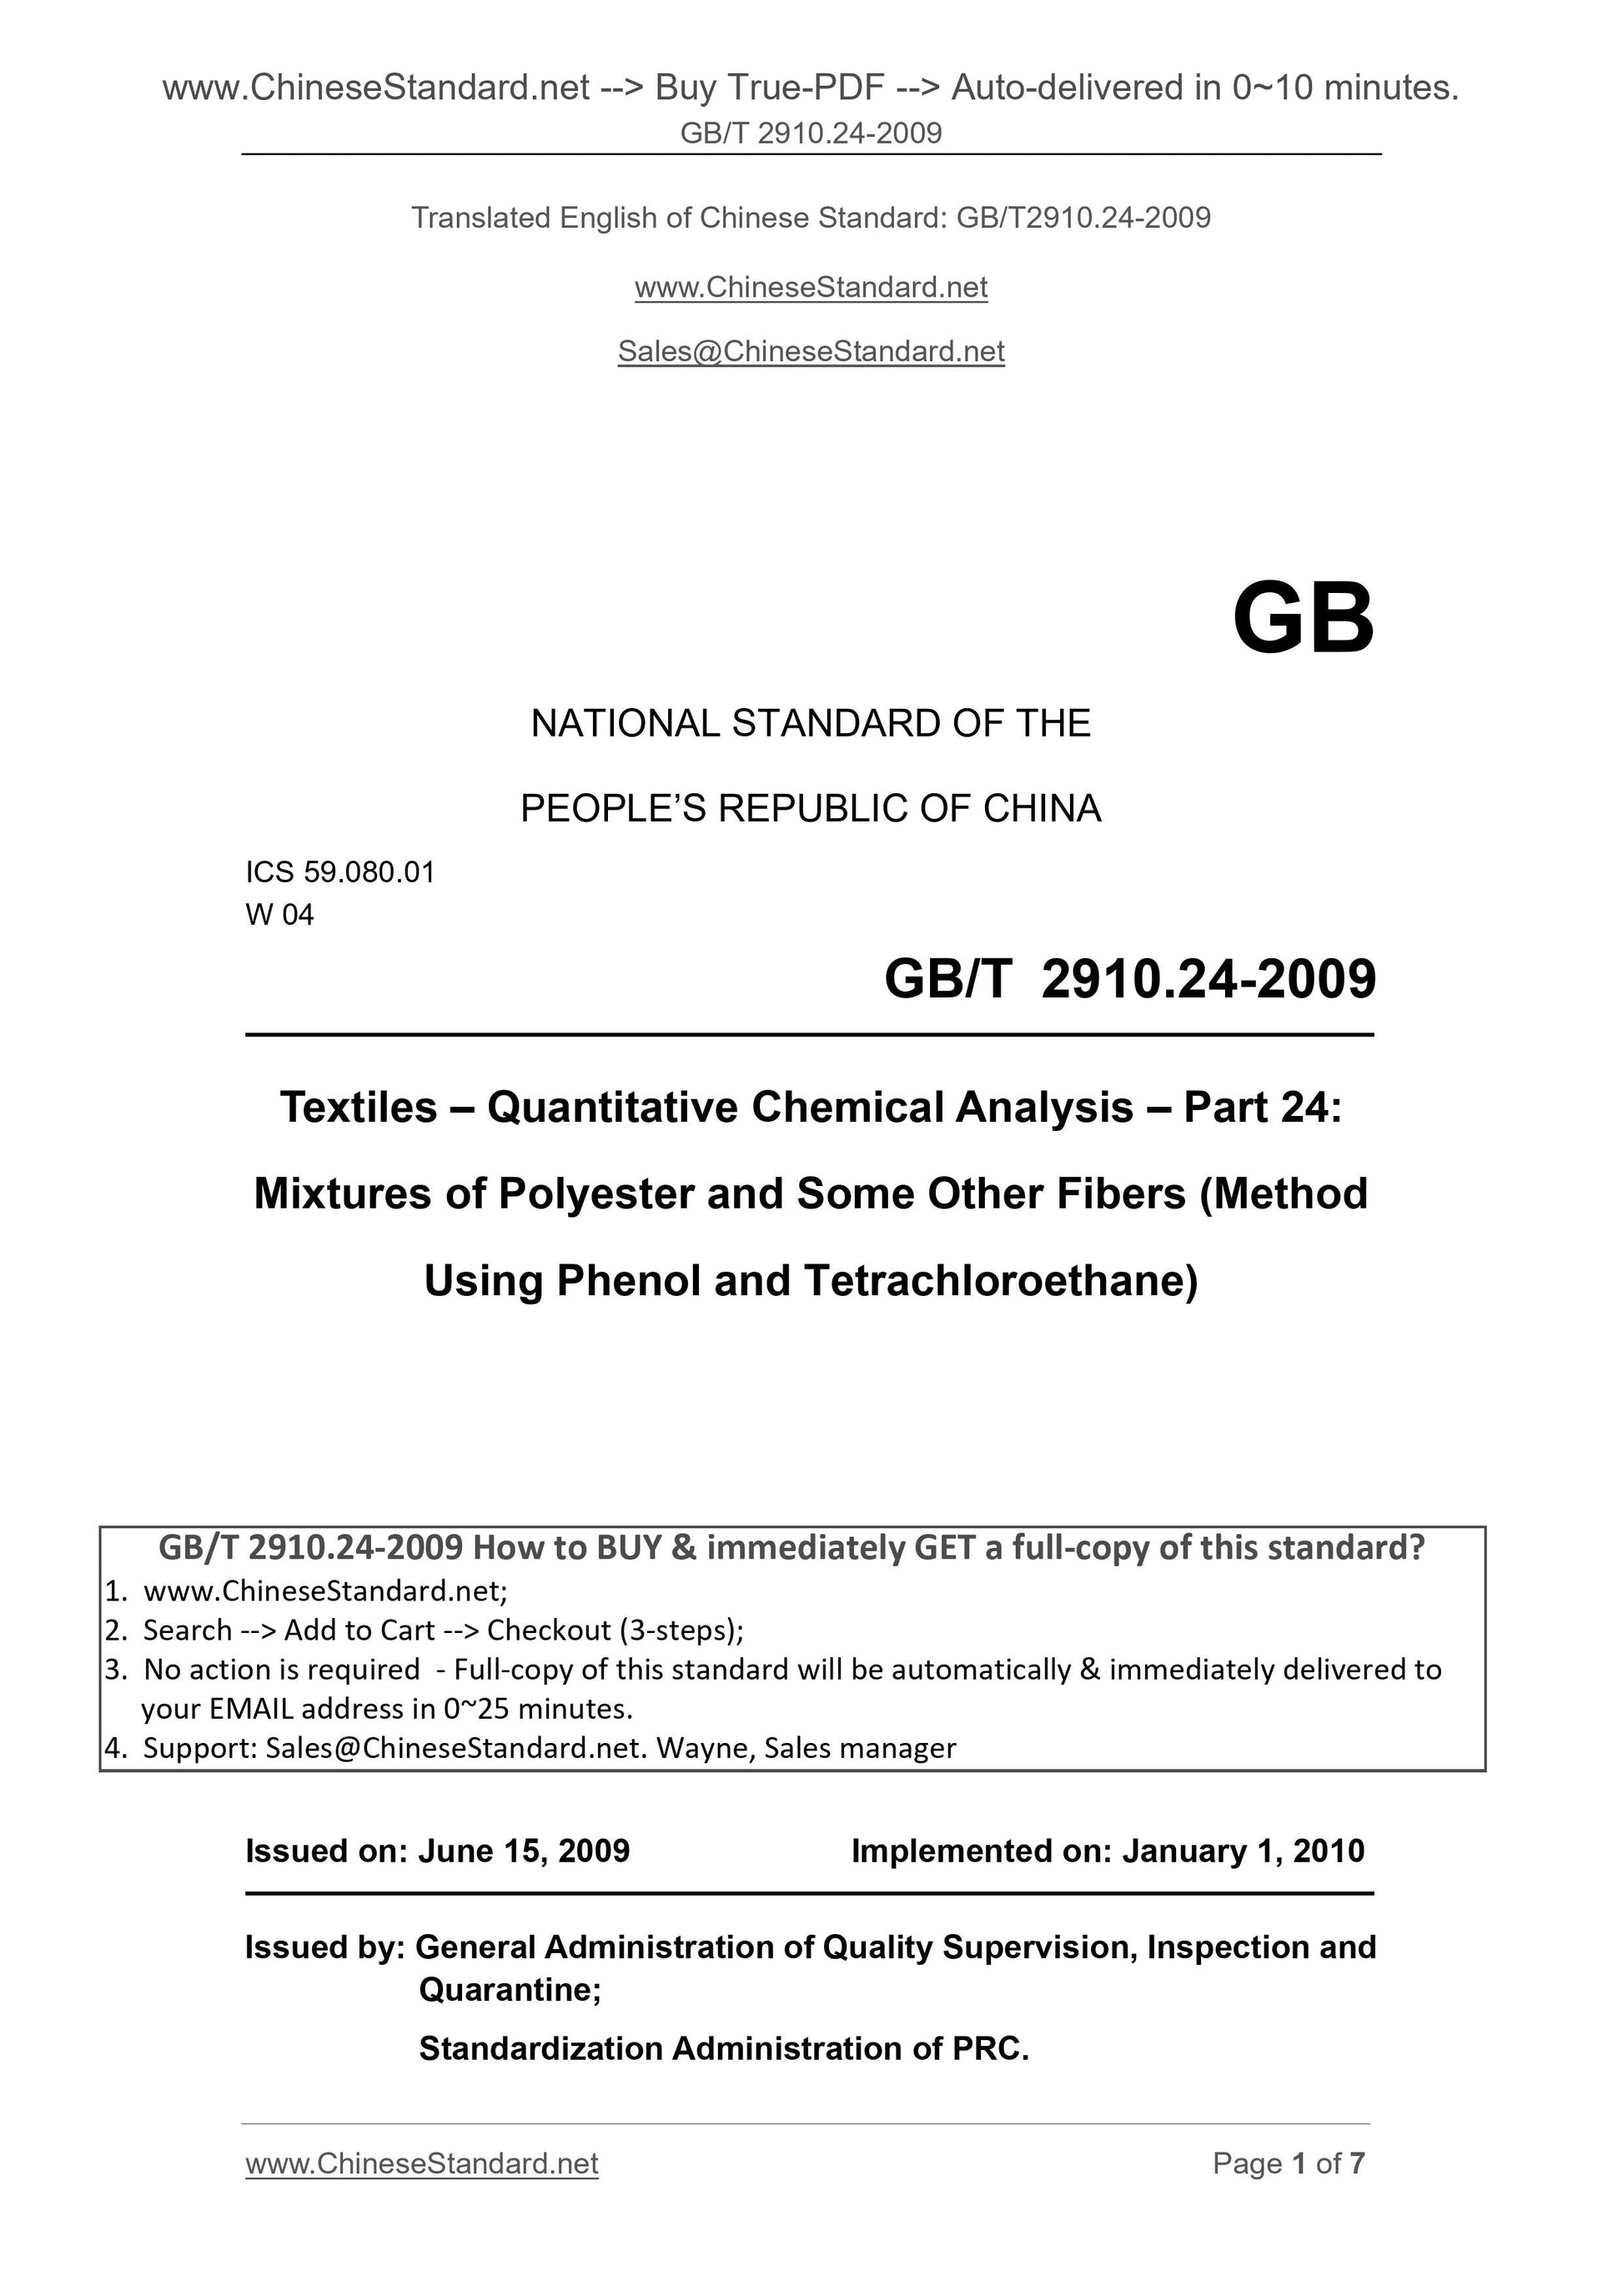 GB/T 2910.24-2009 Page 1